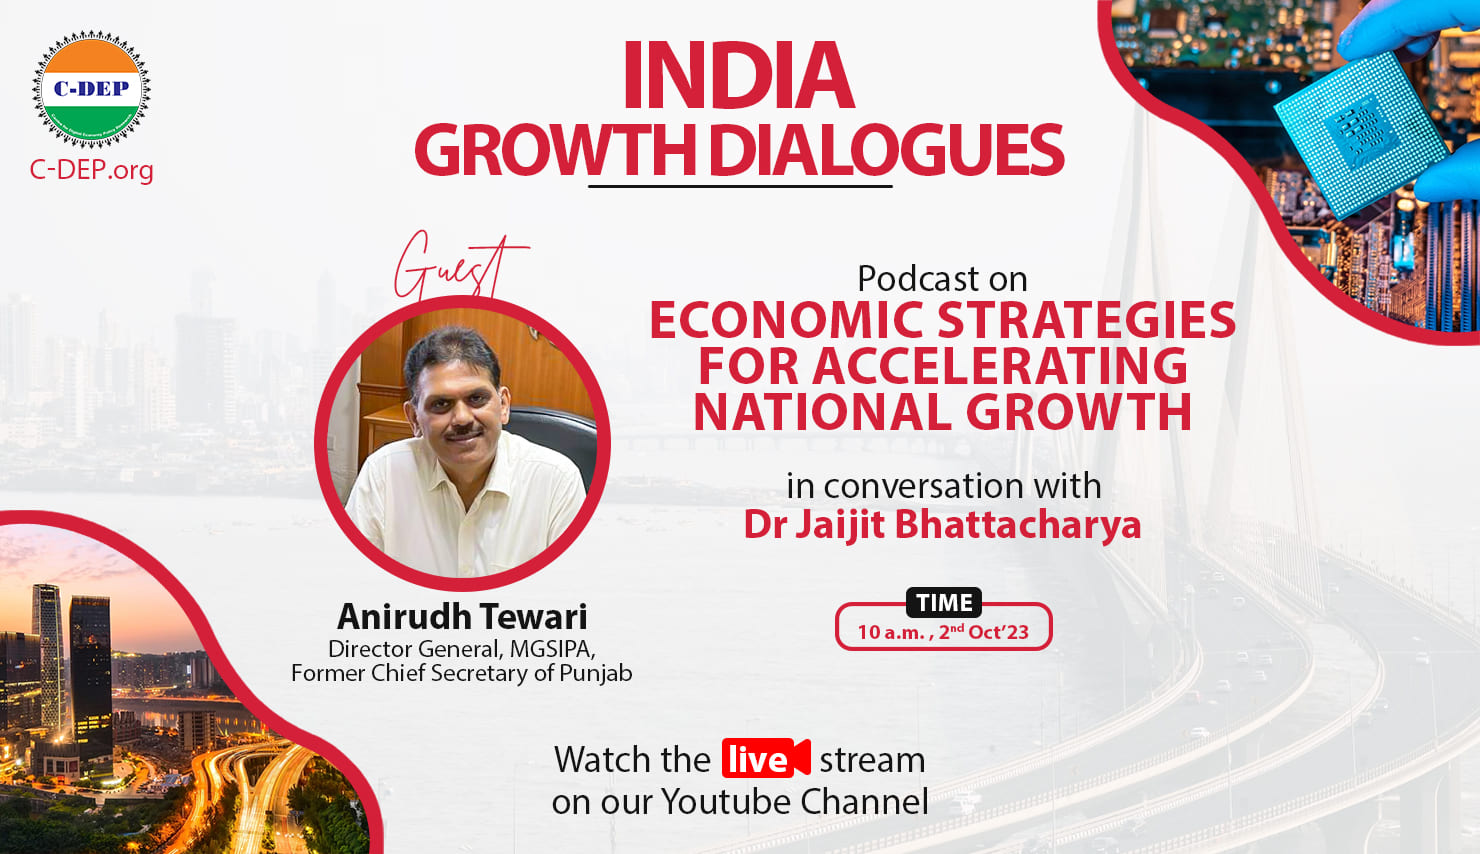 India Growth Dialogues: Economic Strategies for Accelerating National Growth with Anirudh Tewari